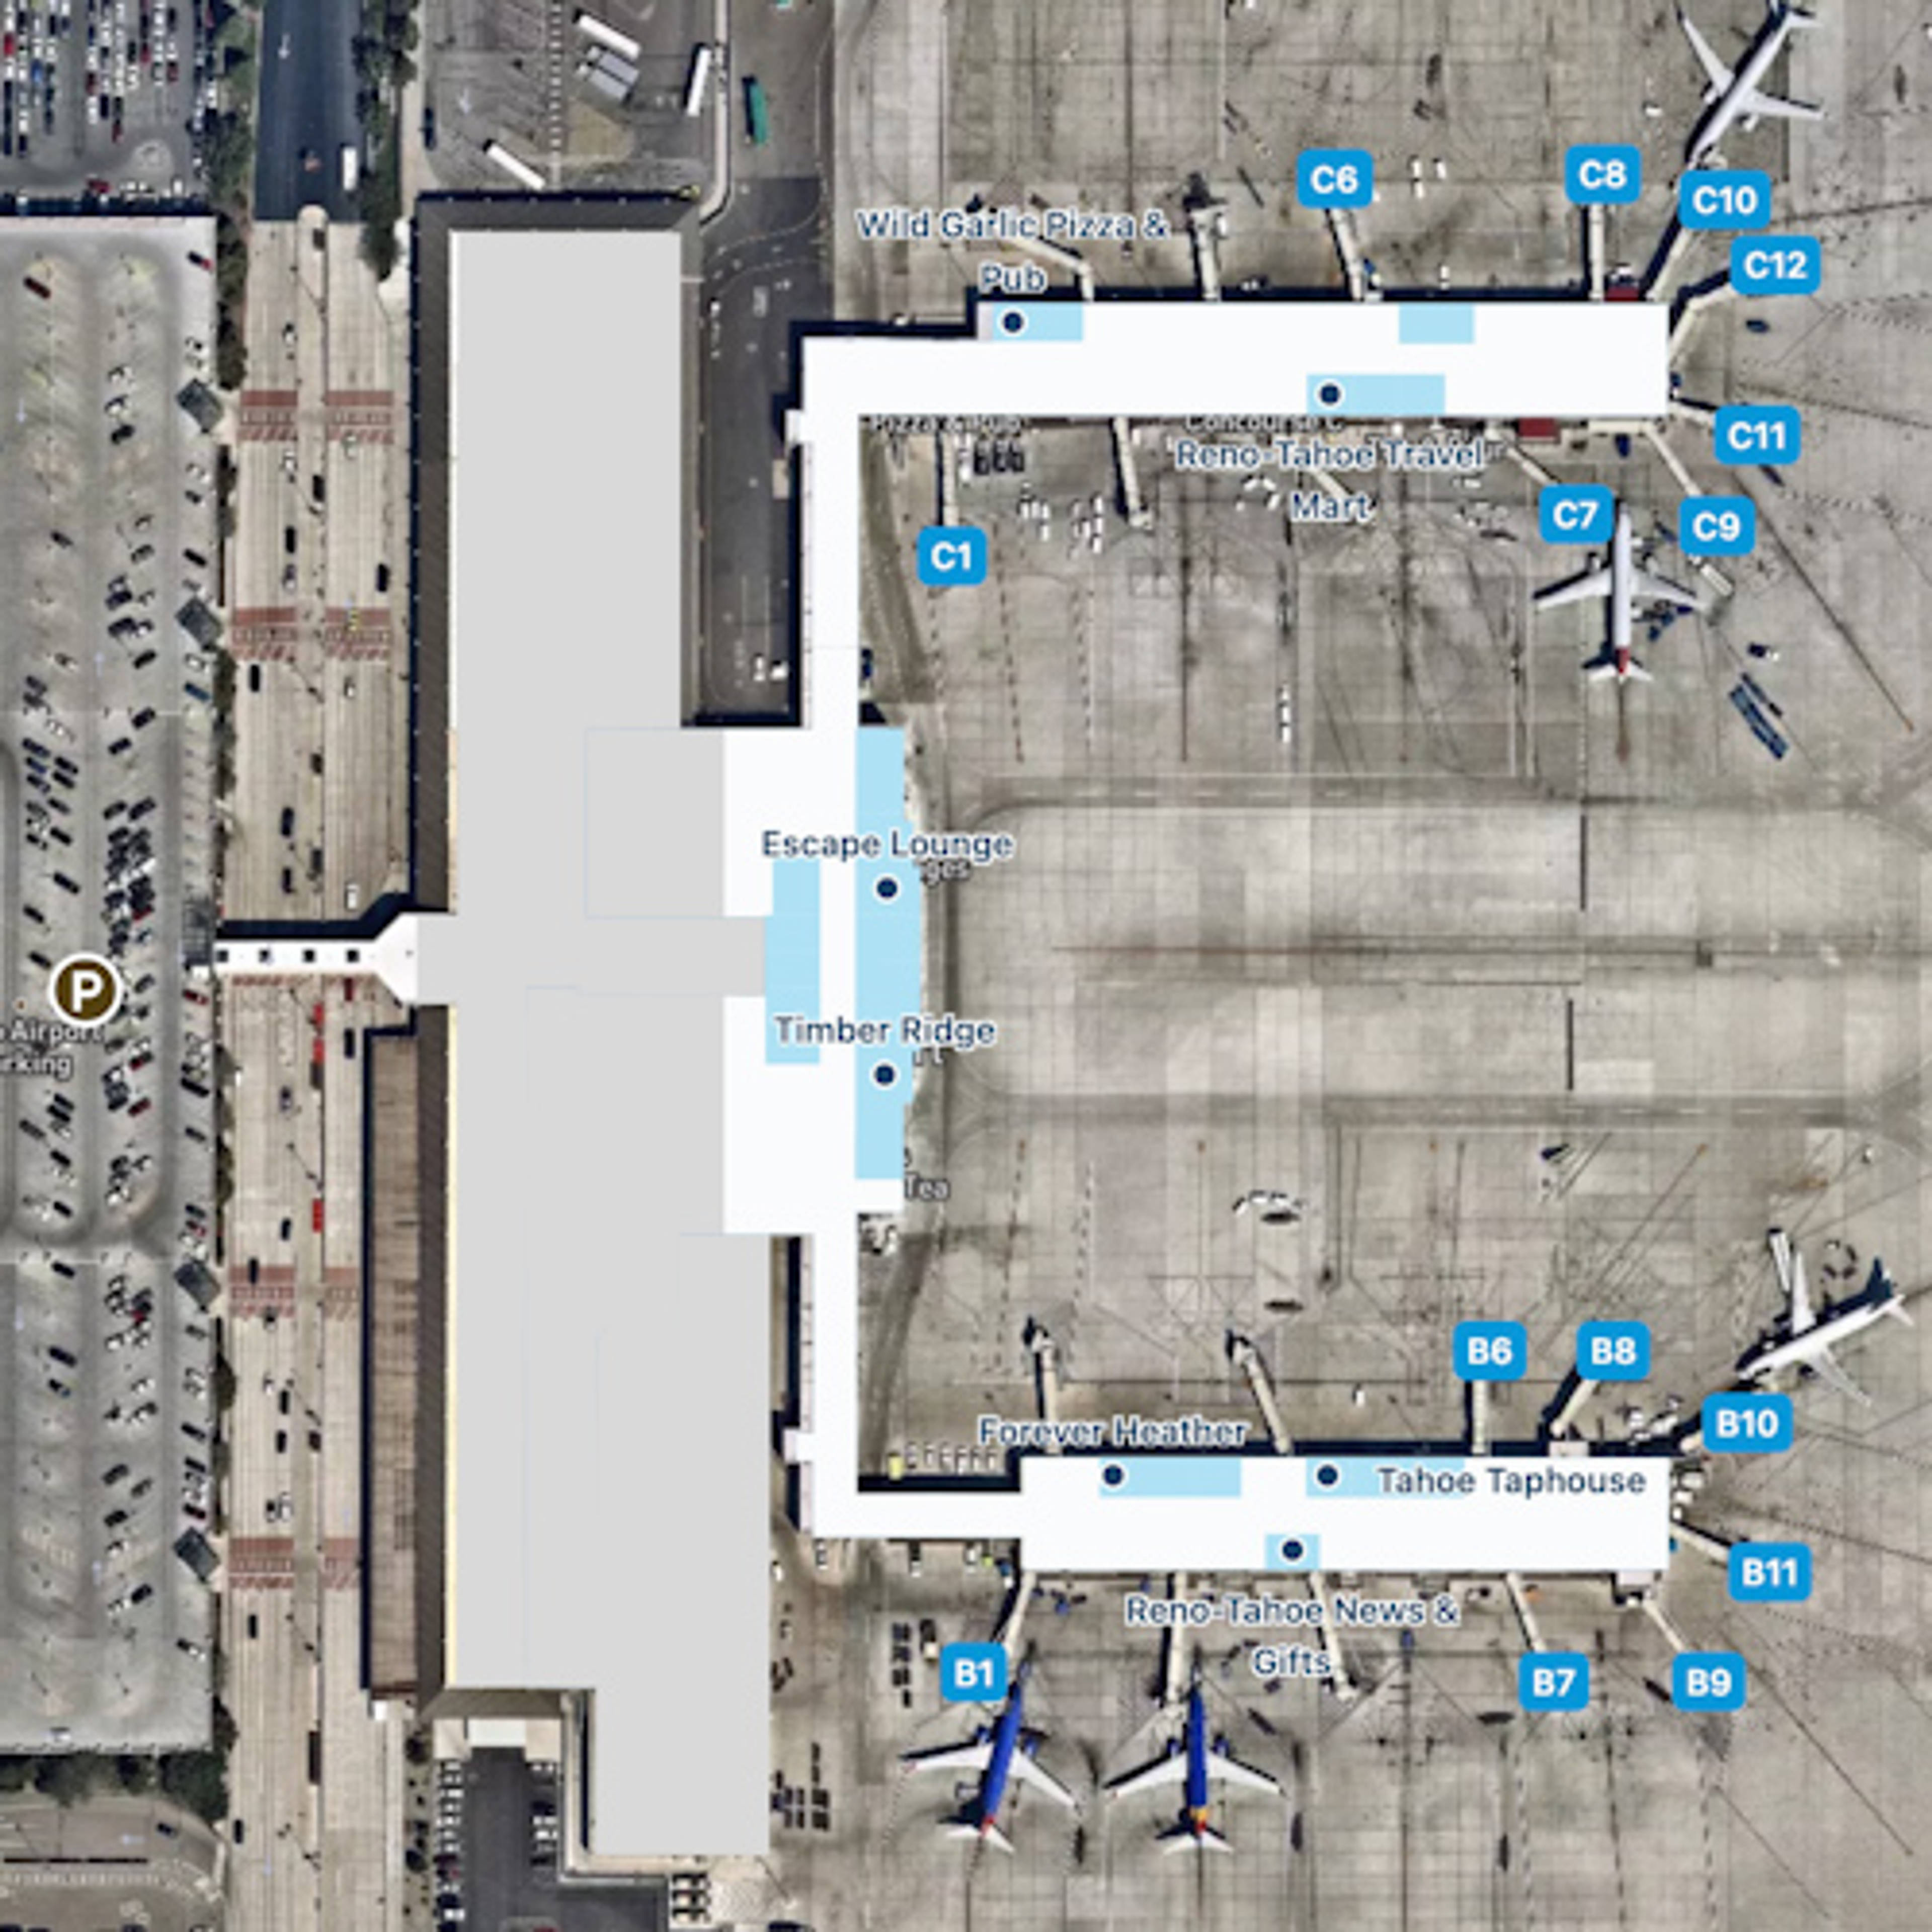 Reno Airport Overview Map